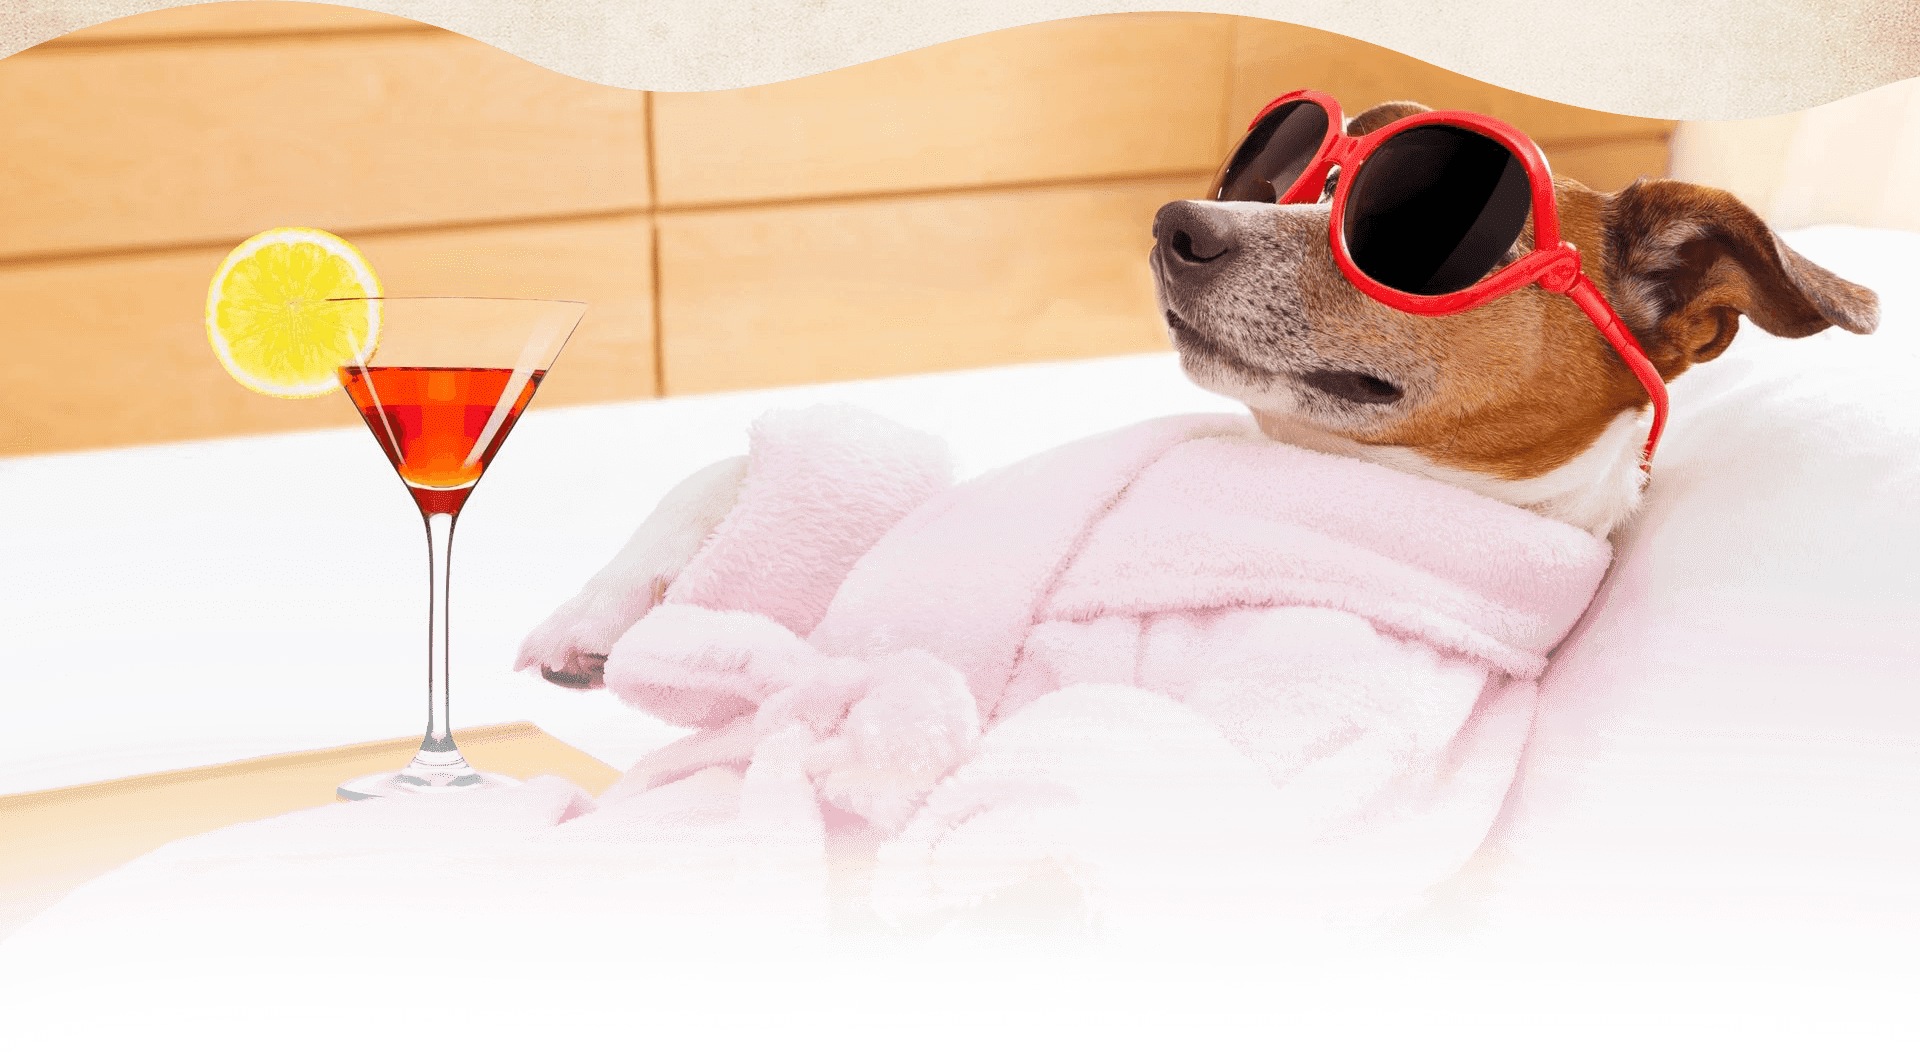 A dog wearing sunglasses and laying on the bed